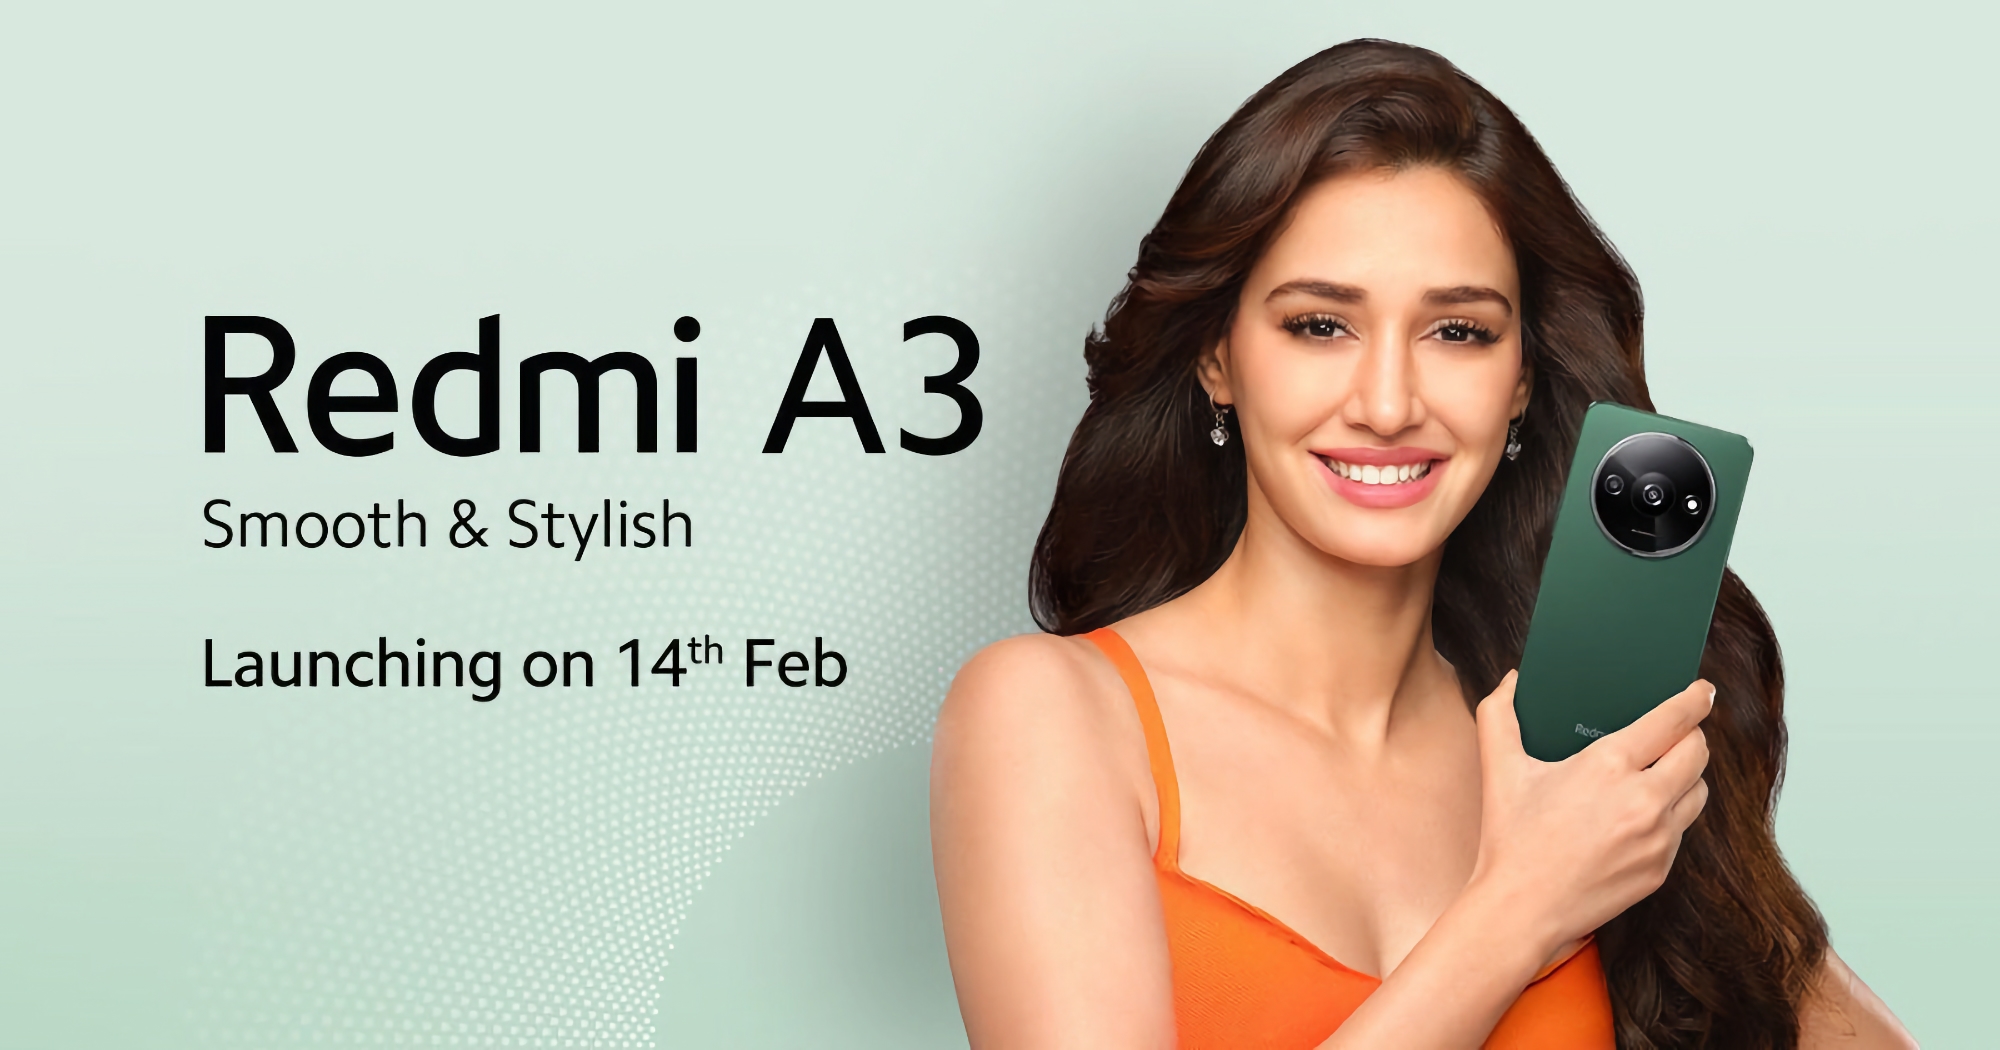 It's official: Redmi A3 with 90Hz screen and MediaTek chip will debut on February 14